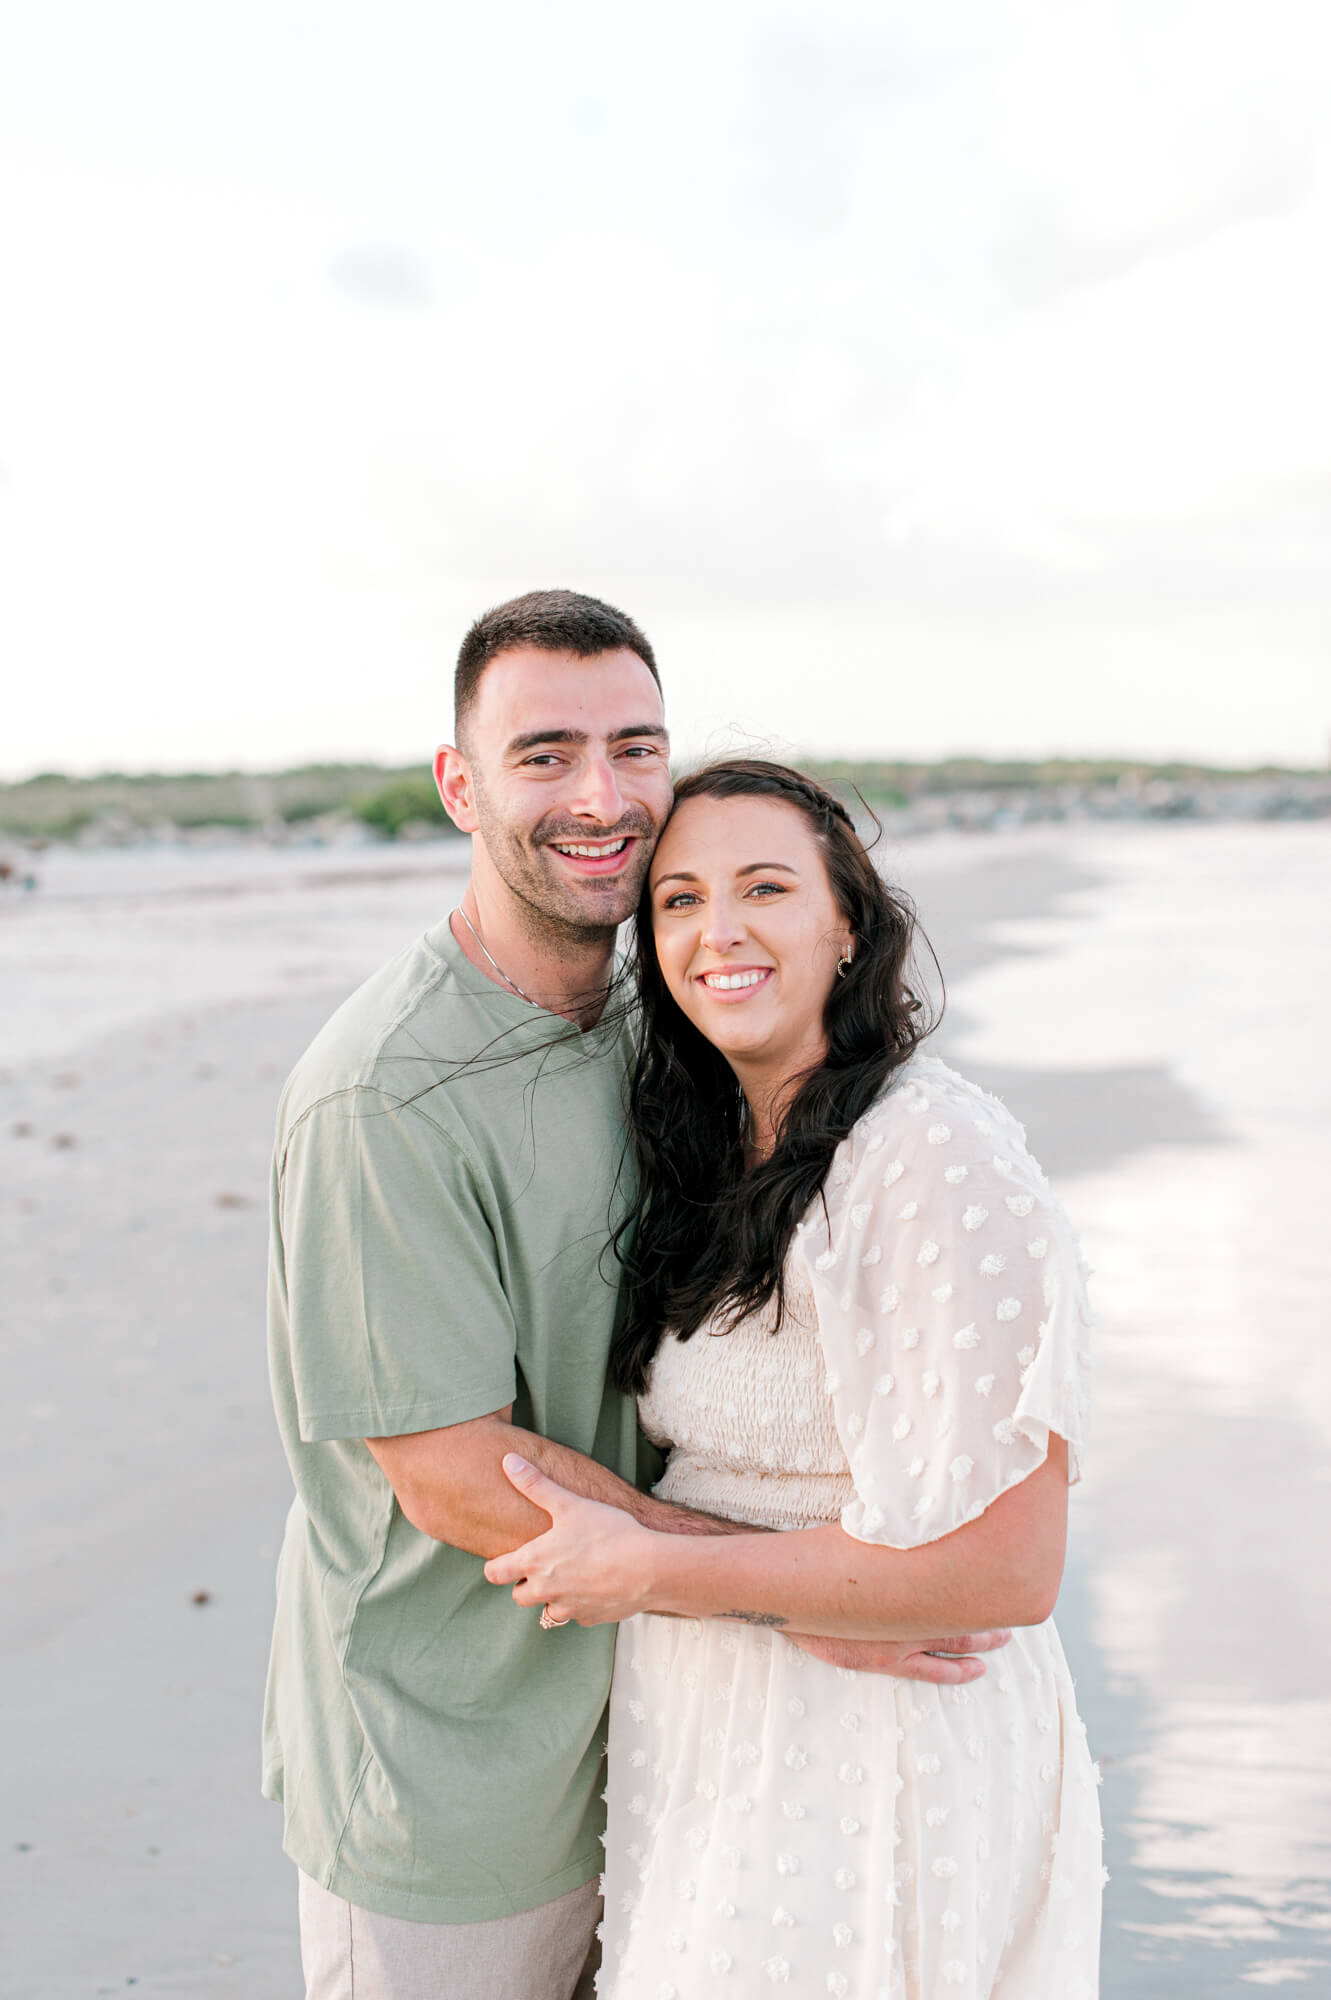 Photo of the newlyweds smiling and cuddling close on the beach at sunset during their extended family beach session.